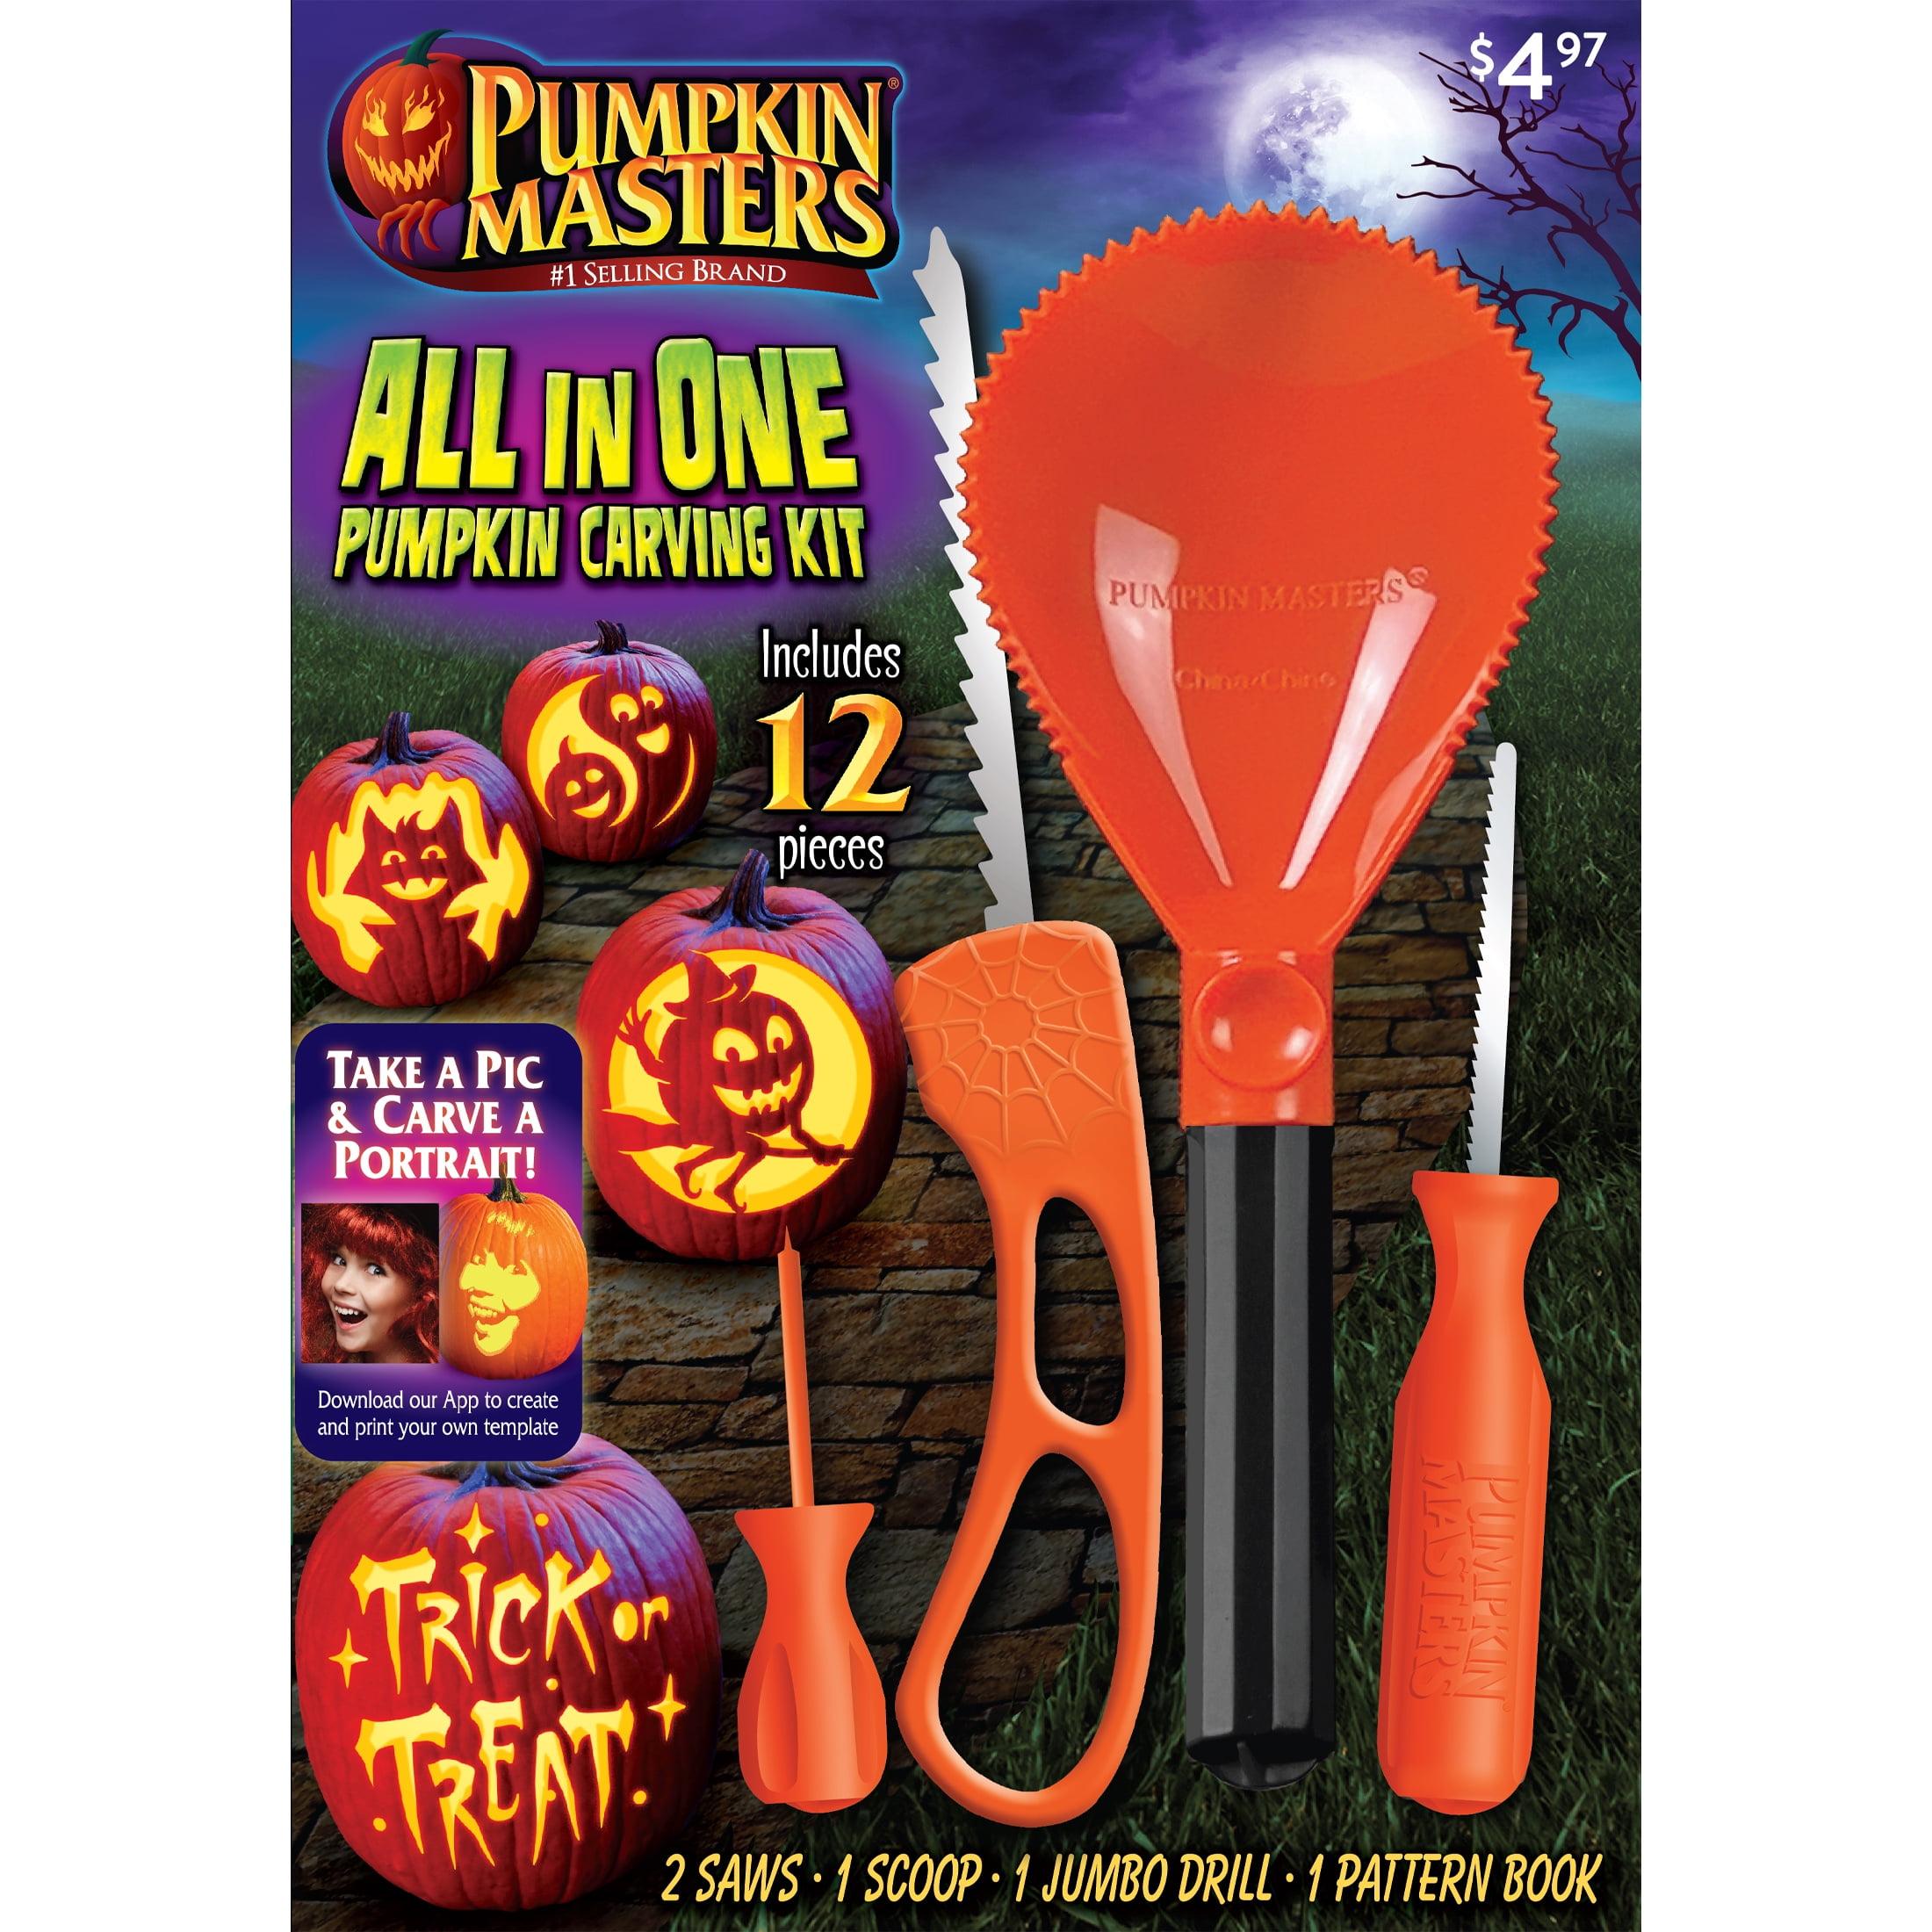 Halloween Pumpkin Carving Kit, All in One, 1 Kit, by Pumpkin Masters ...